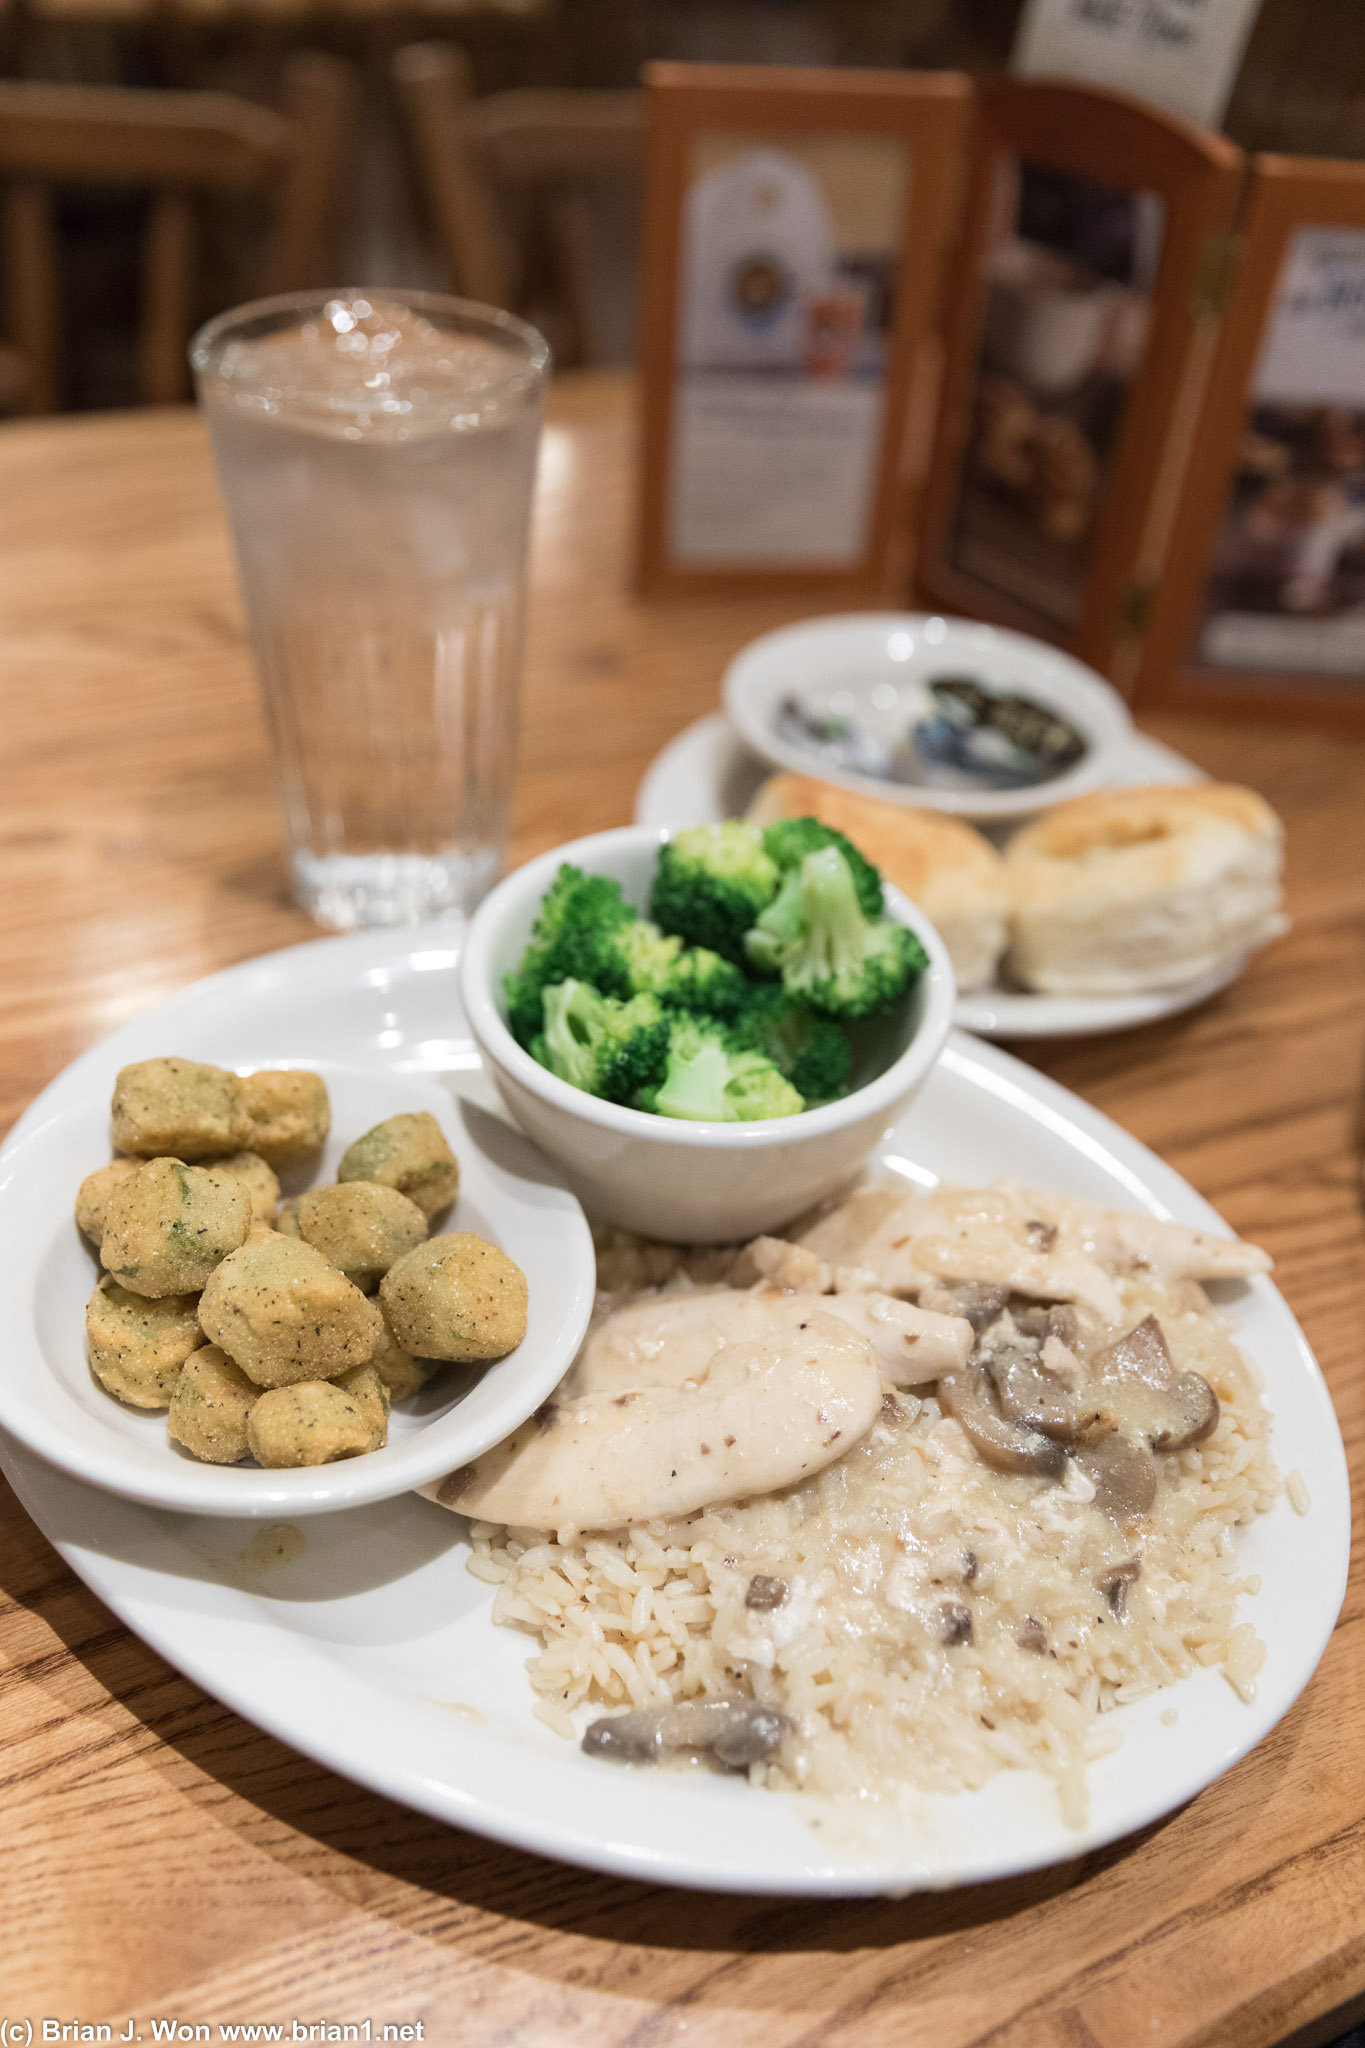 Chicken and rice with fried okra, broccoli, and biscuits.